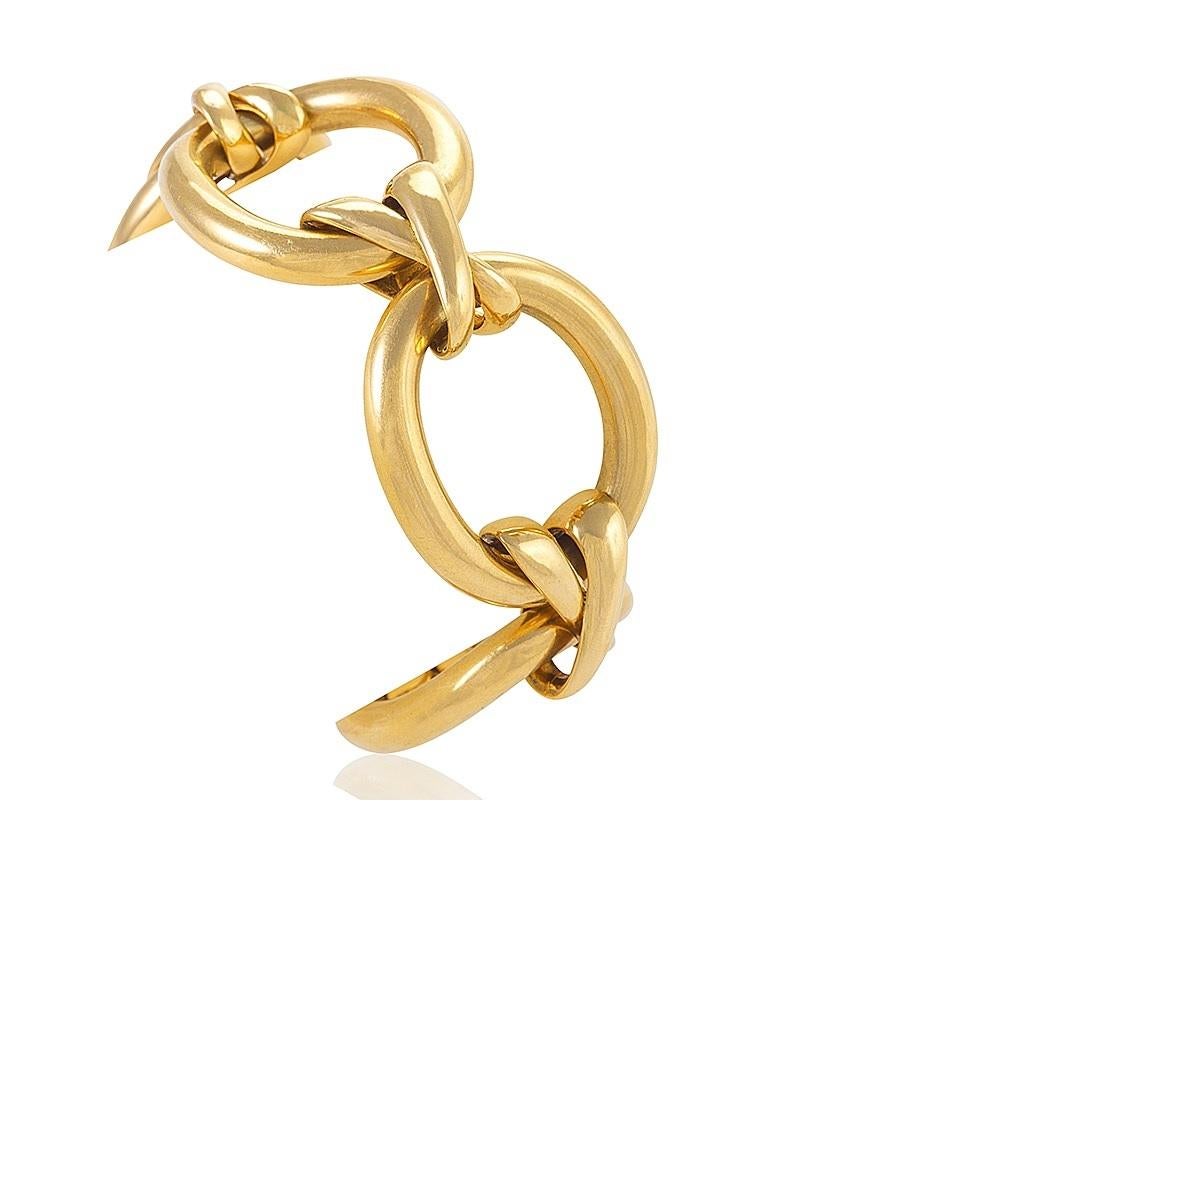 A French Late-20th Century 18 karat gold X-link bracelet by Paloma Picasso for Tiffany & Co. The bracelet is a beautiful example of the long-celebrated designer's hallmark simplistic elegance, featuring Tiffany's famed 